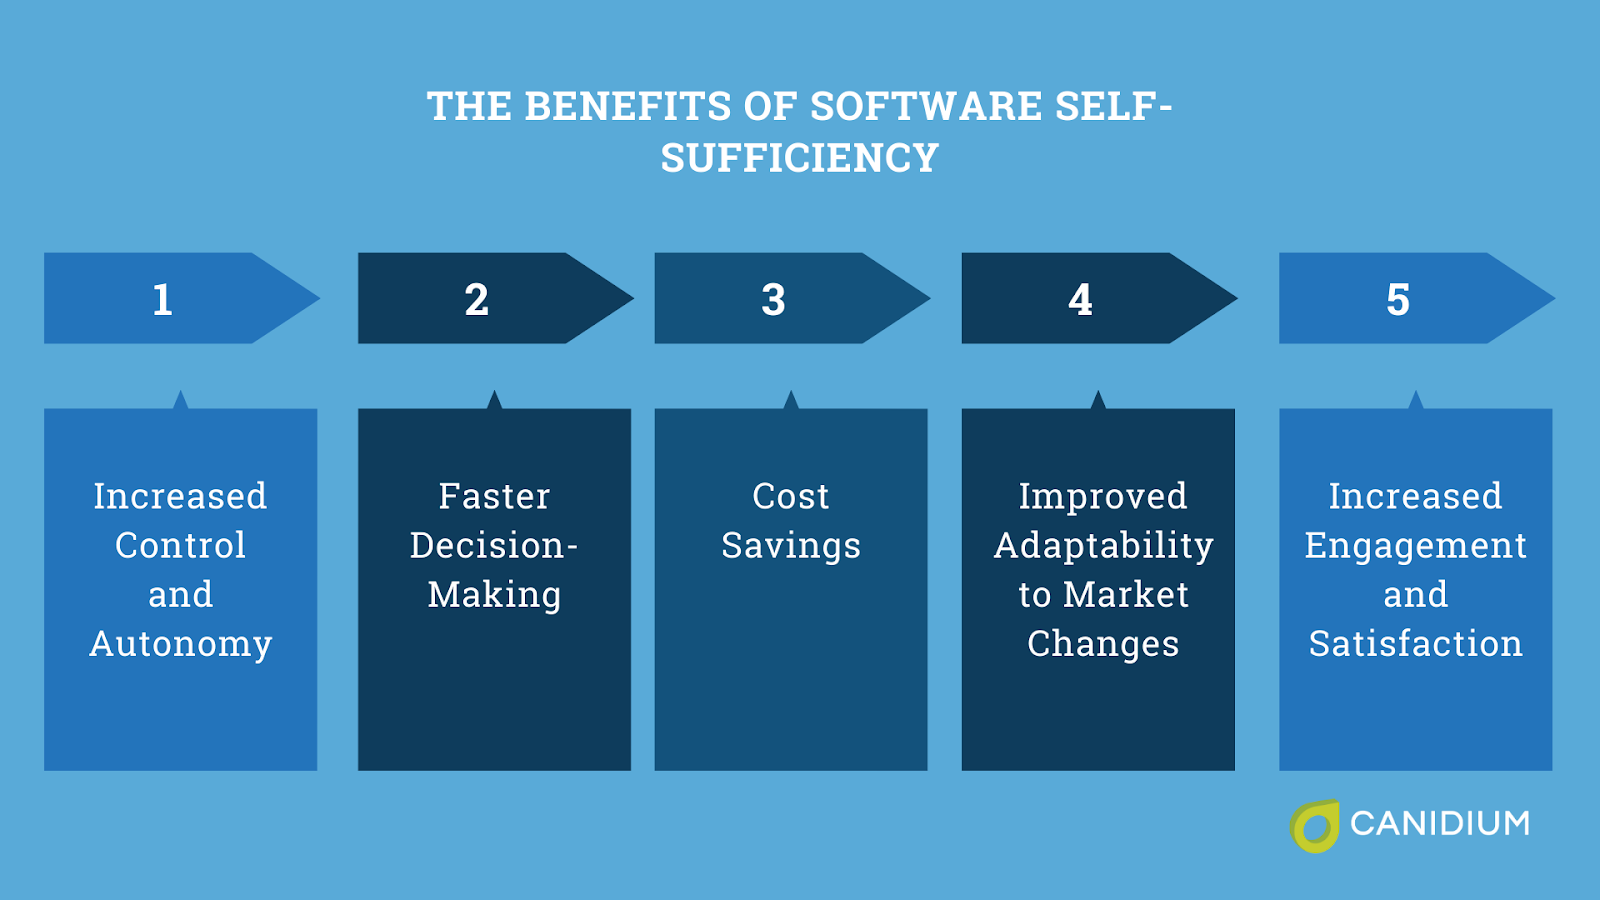 The benefits of software self-sufficiency